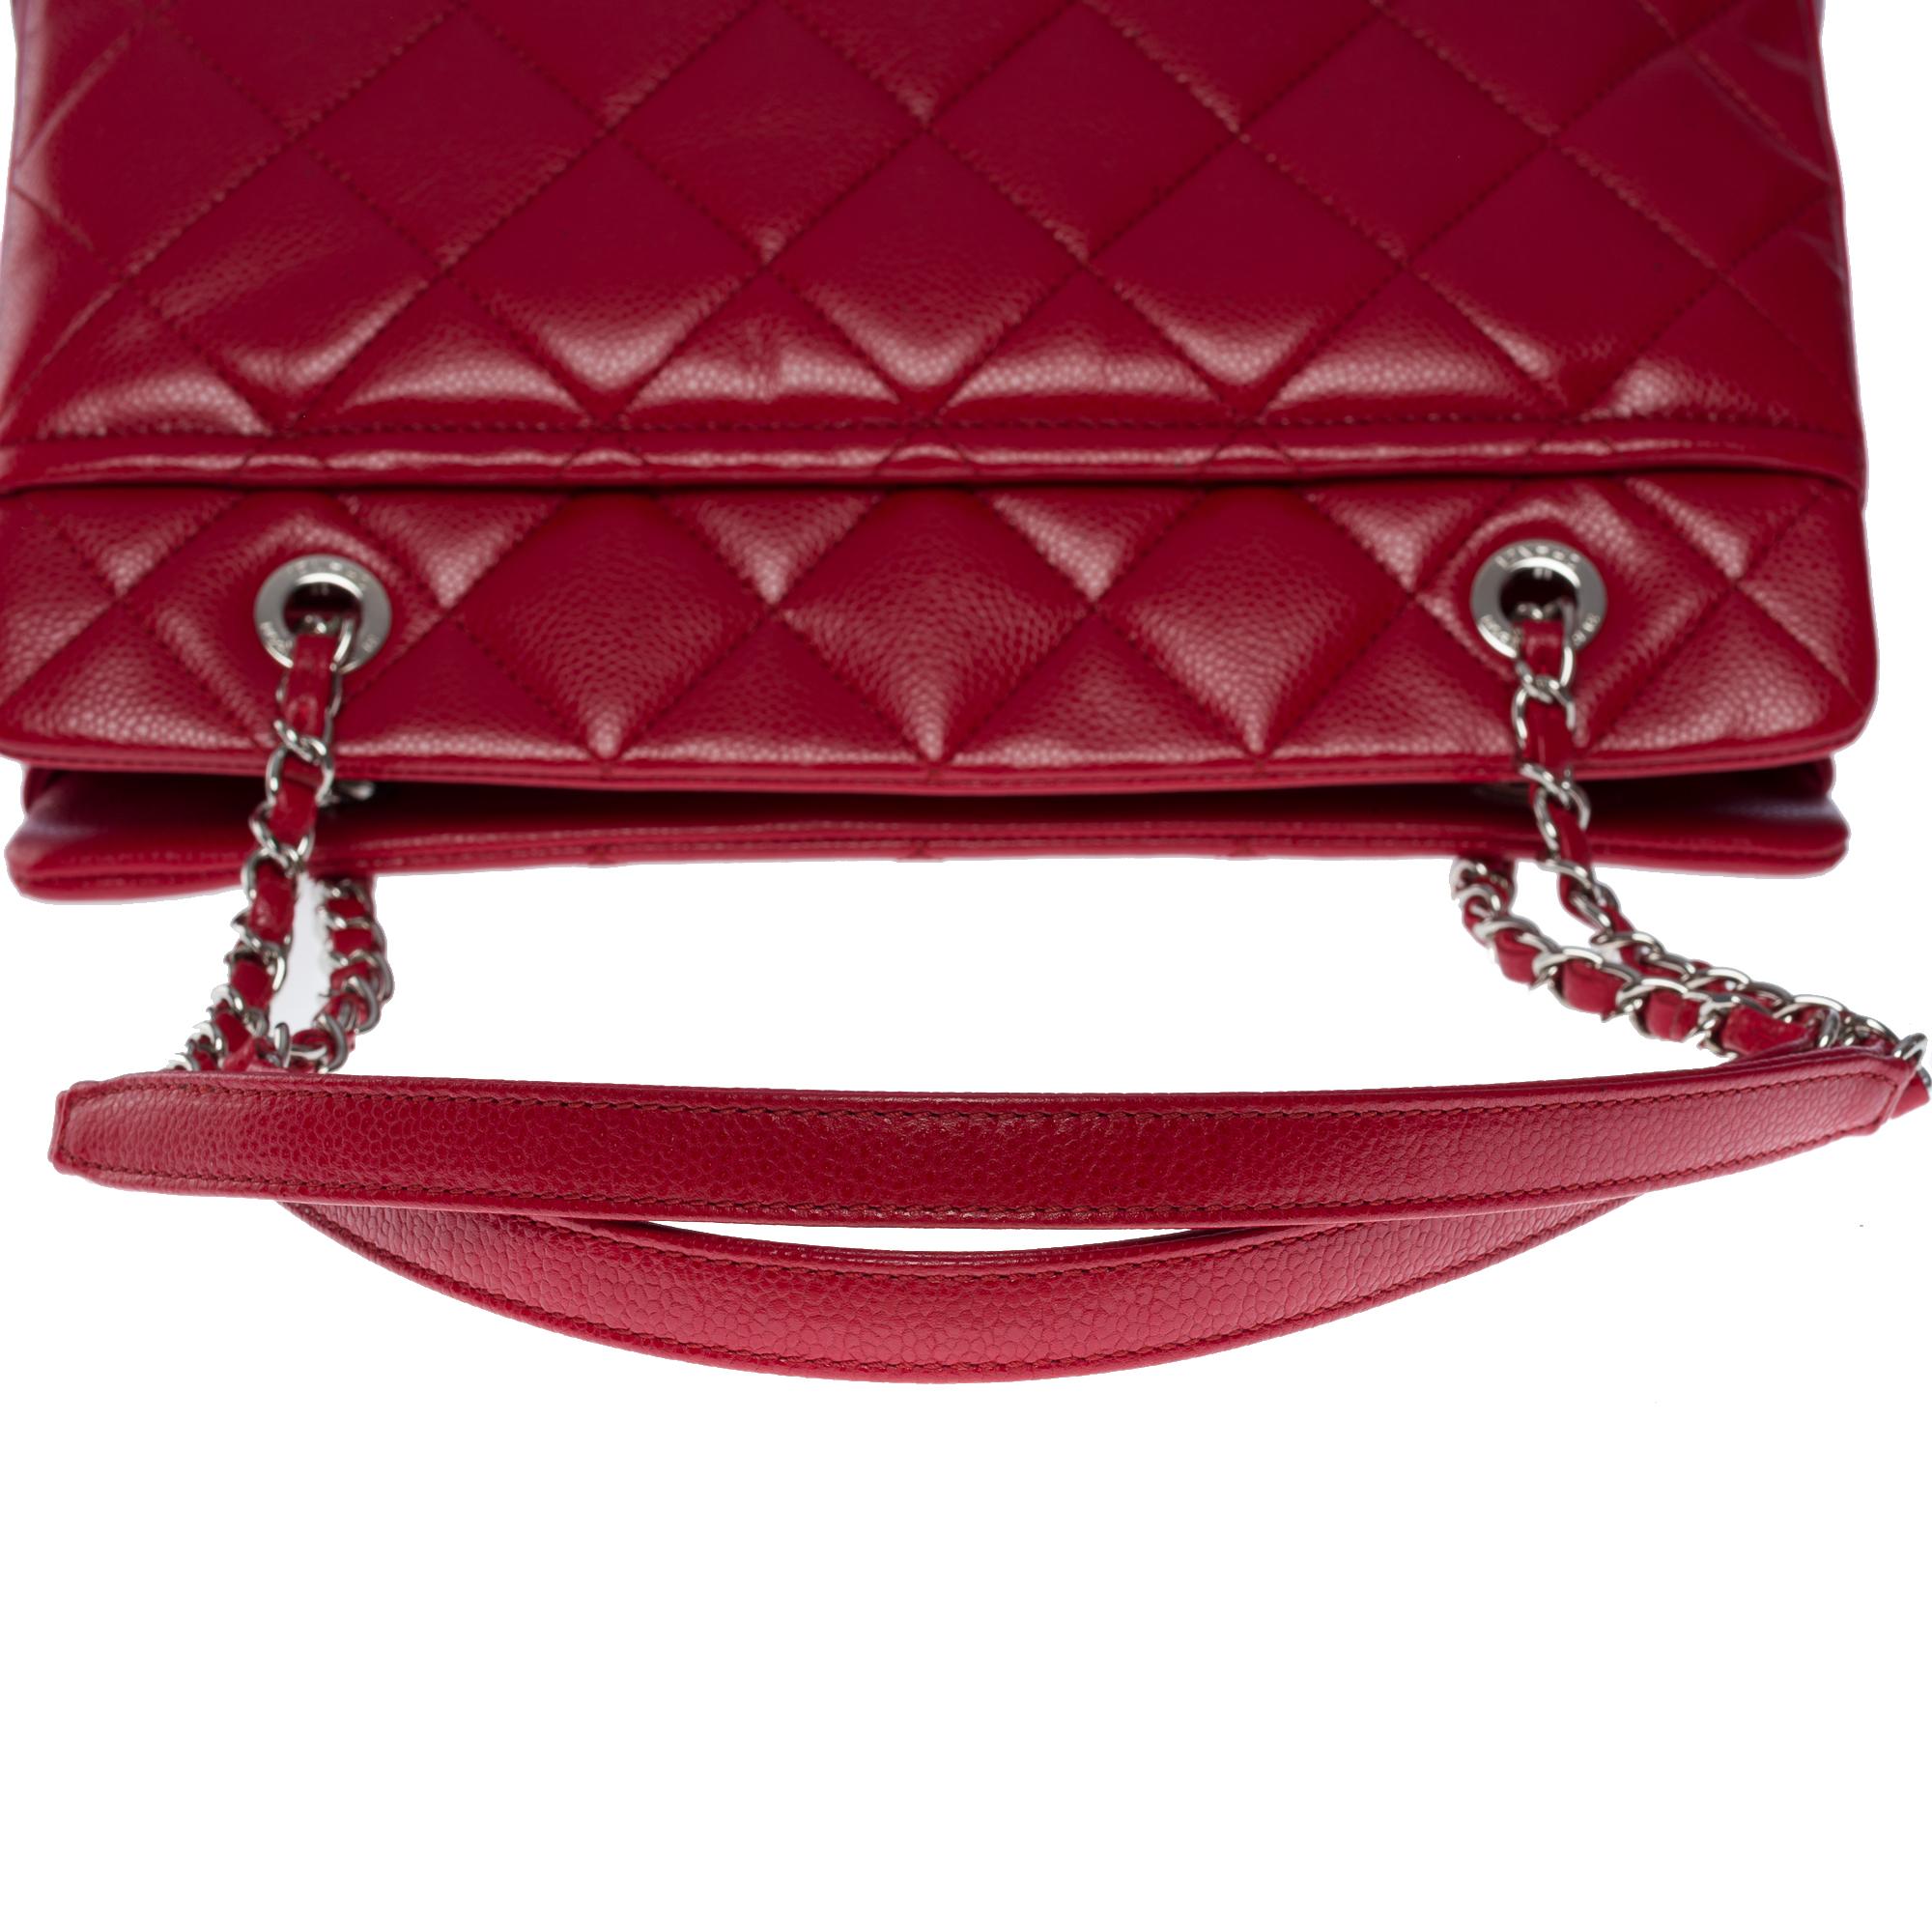 Bright & Amazing Chanel Shopping Tote bag in Red Caviar quilted leather, SHW 4